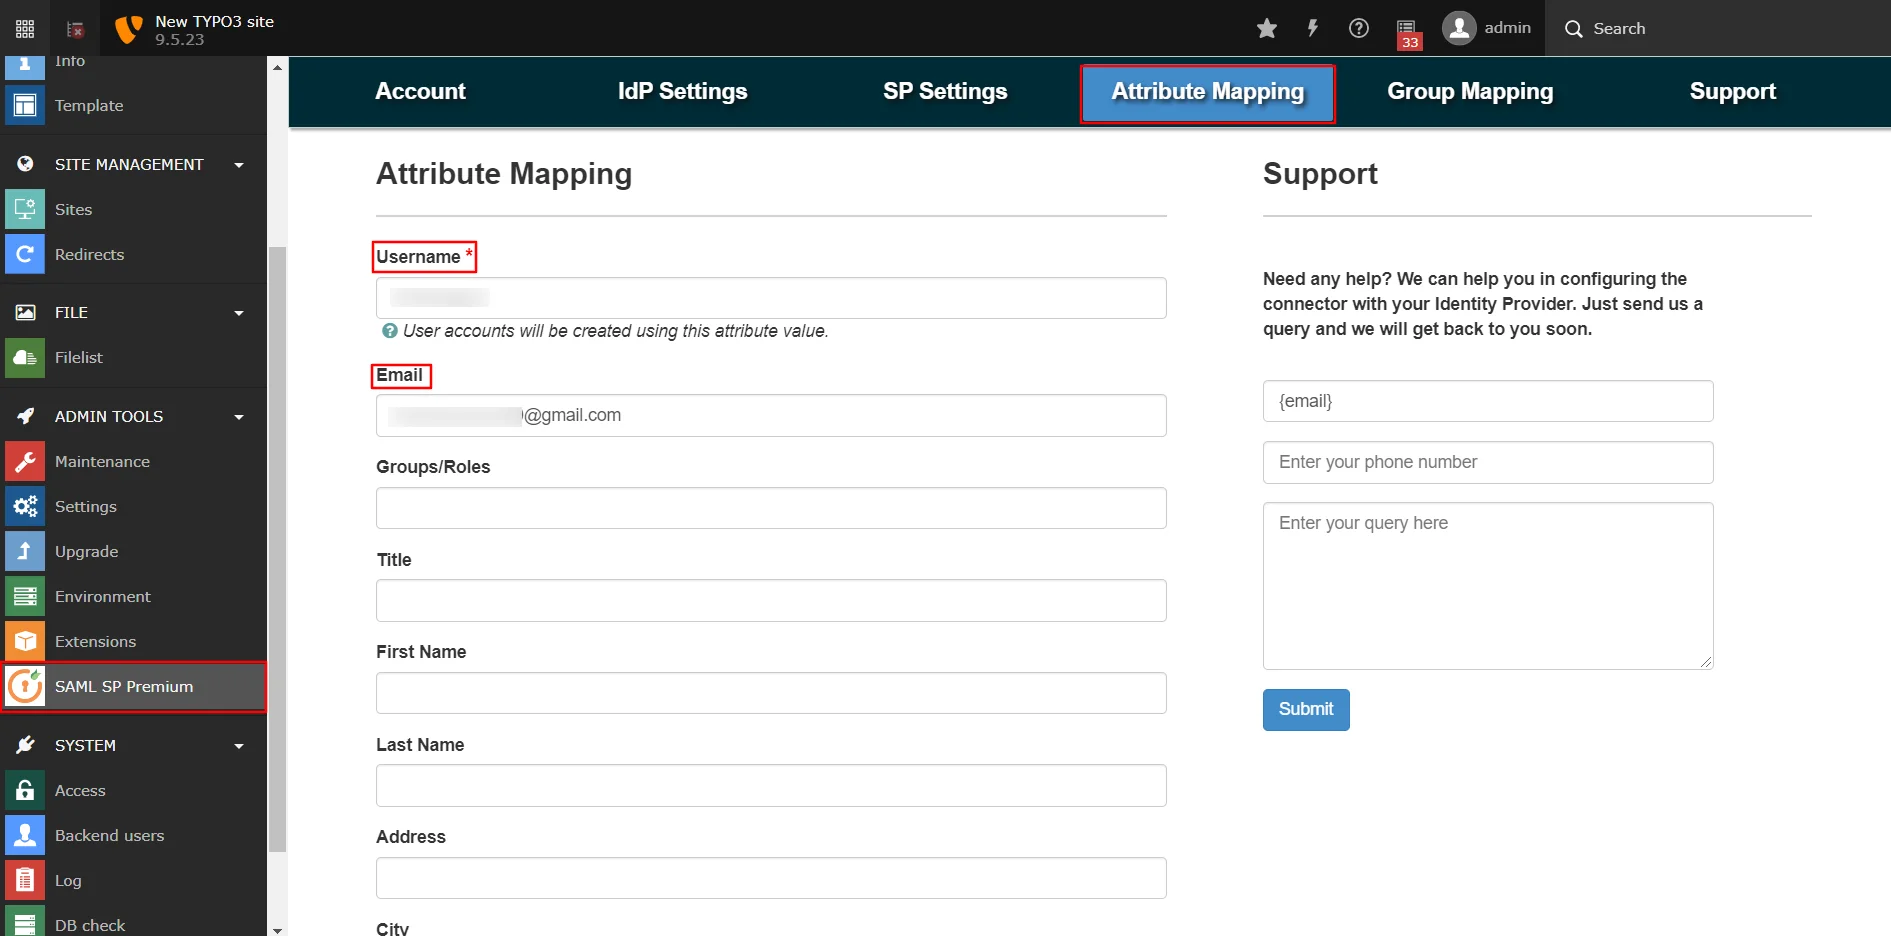 TYPO3 SAML Single Sign-On attribute mapping